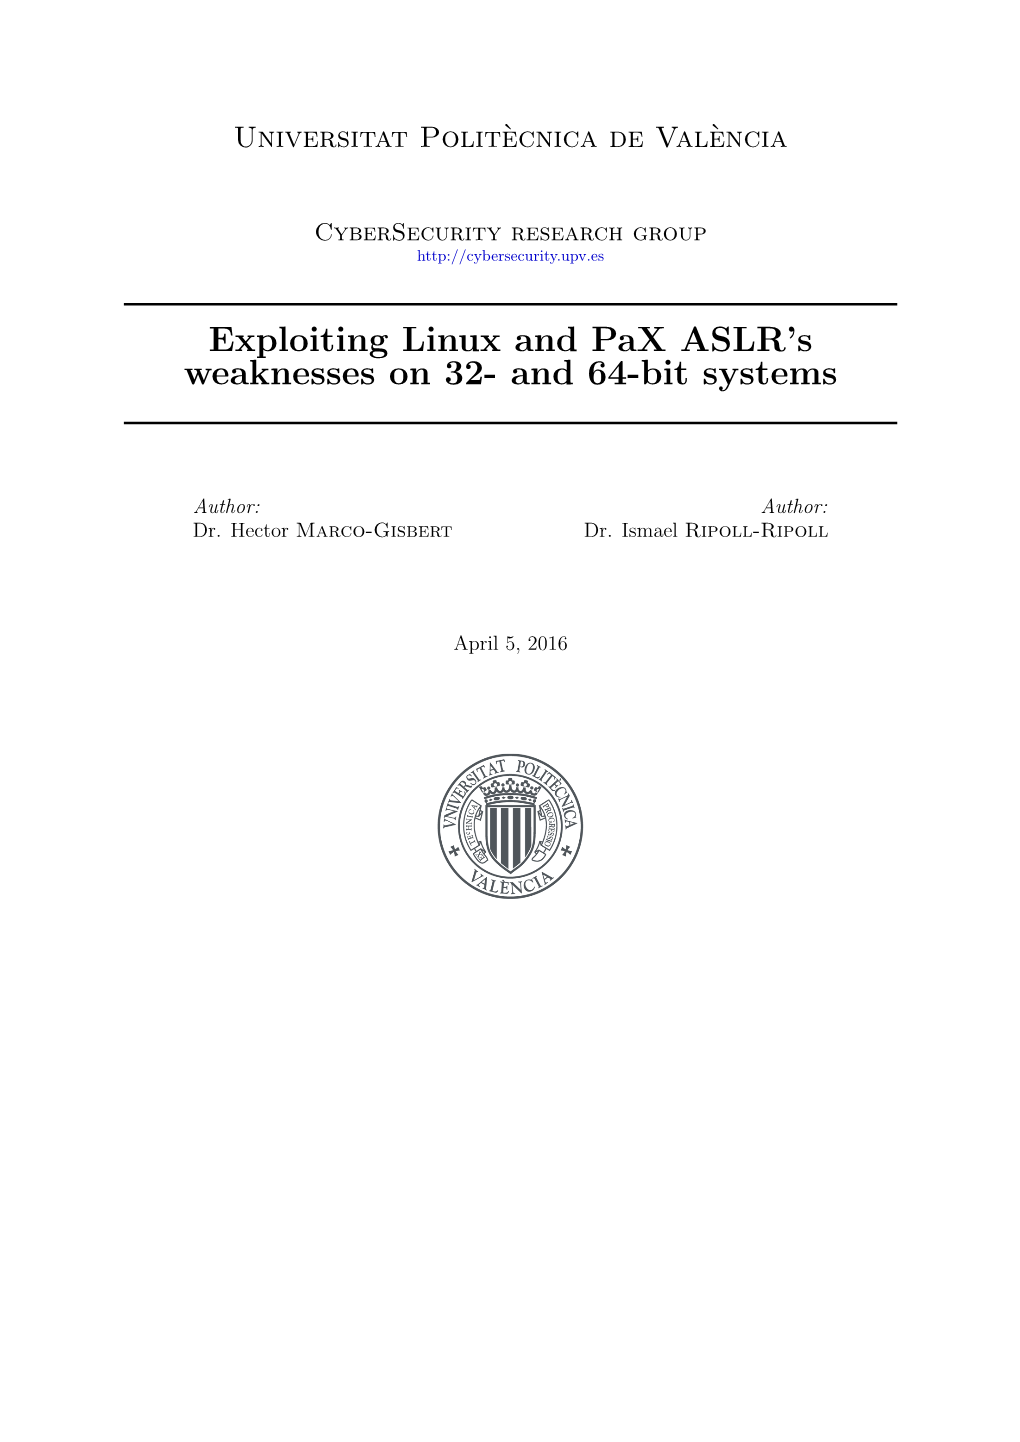 Exploiting Linux and Pax ASLR's Weaknesses on 32